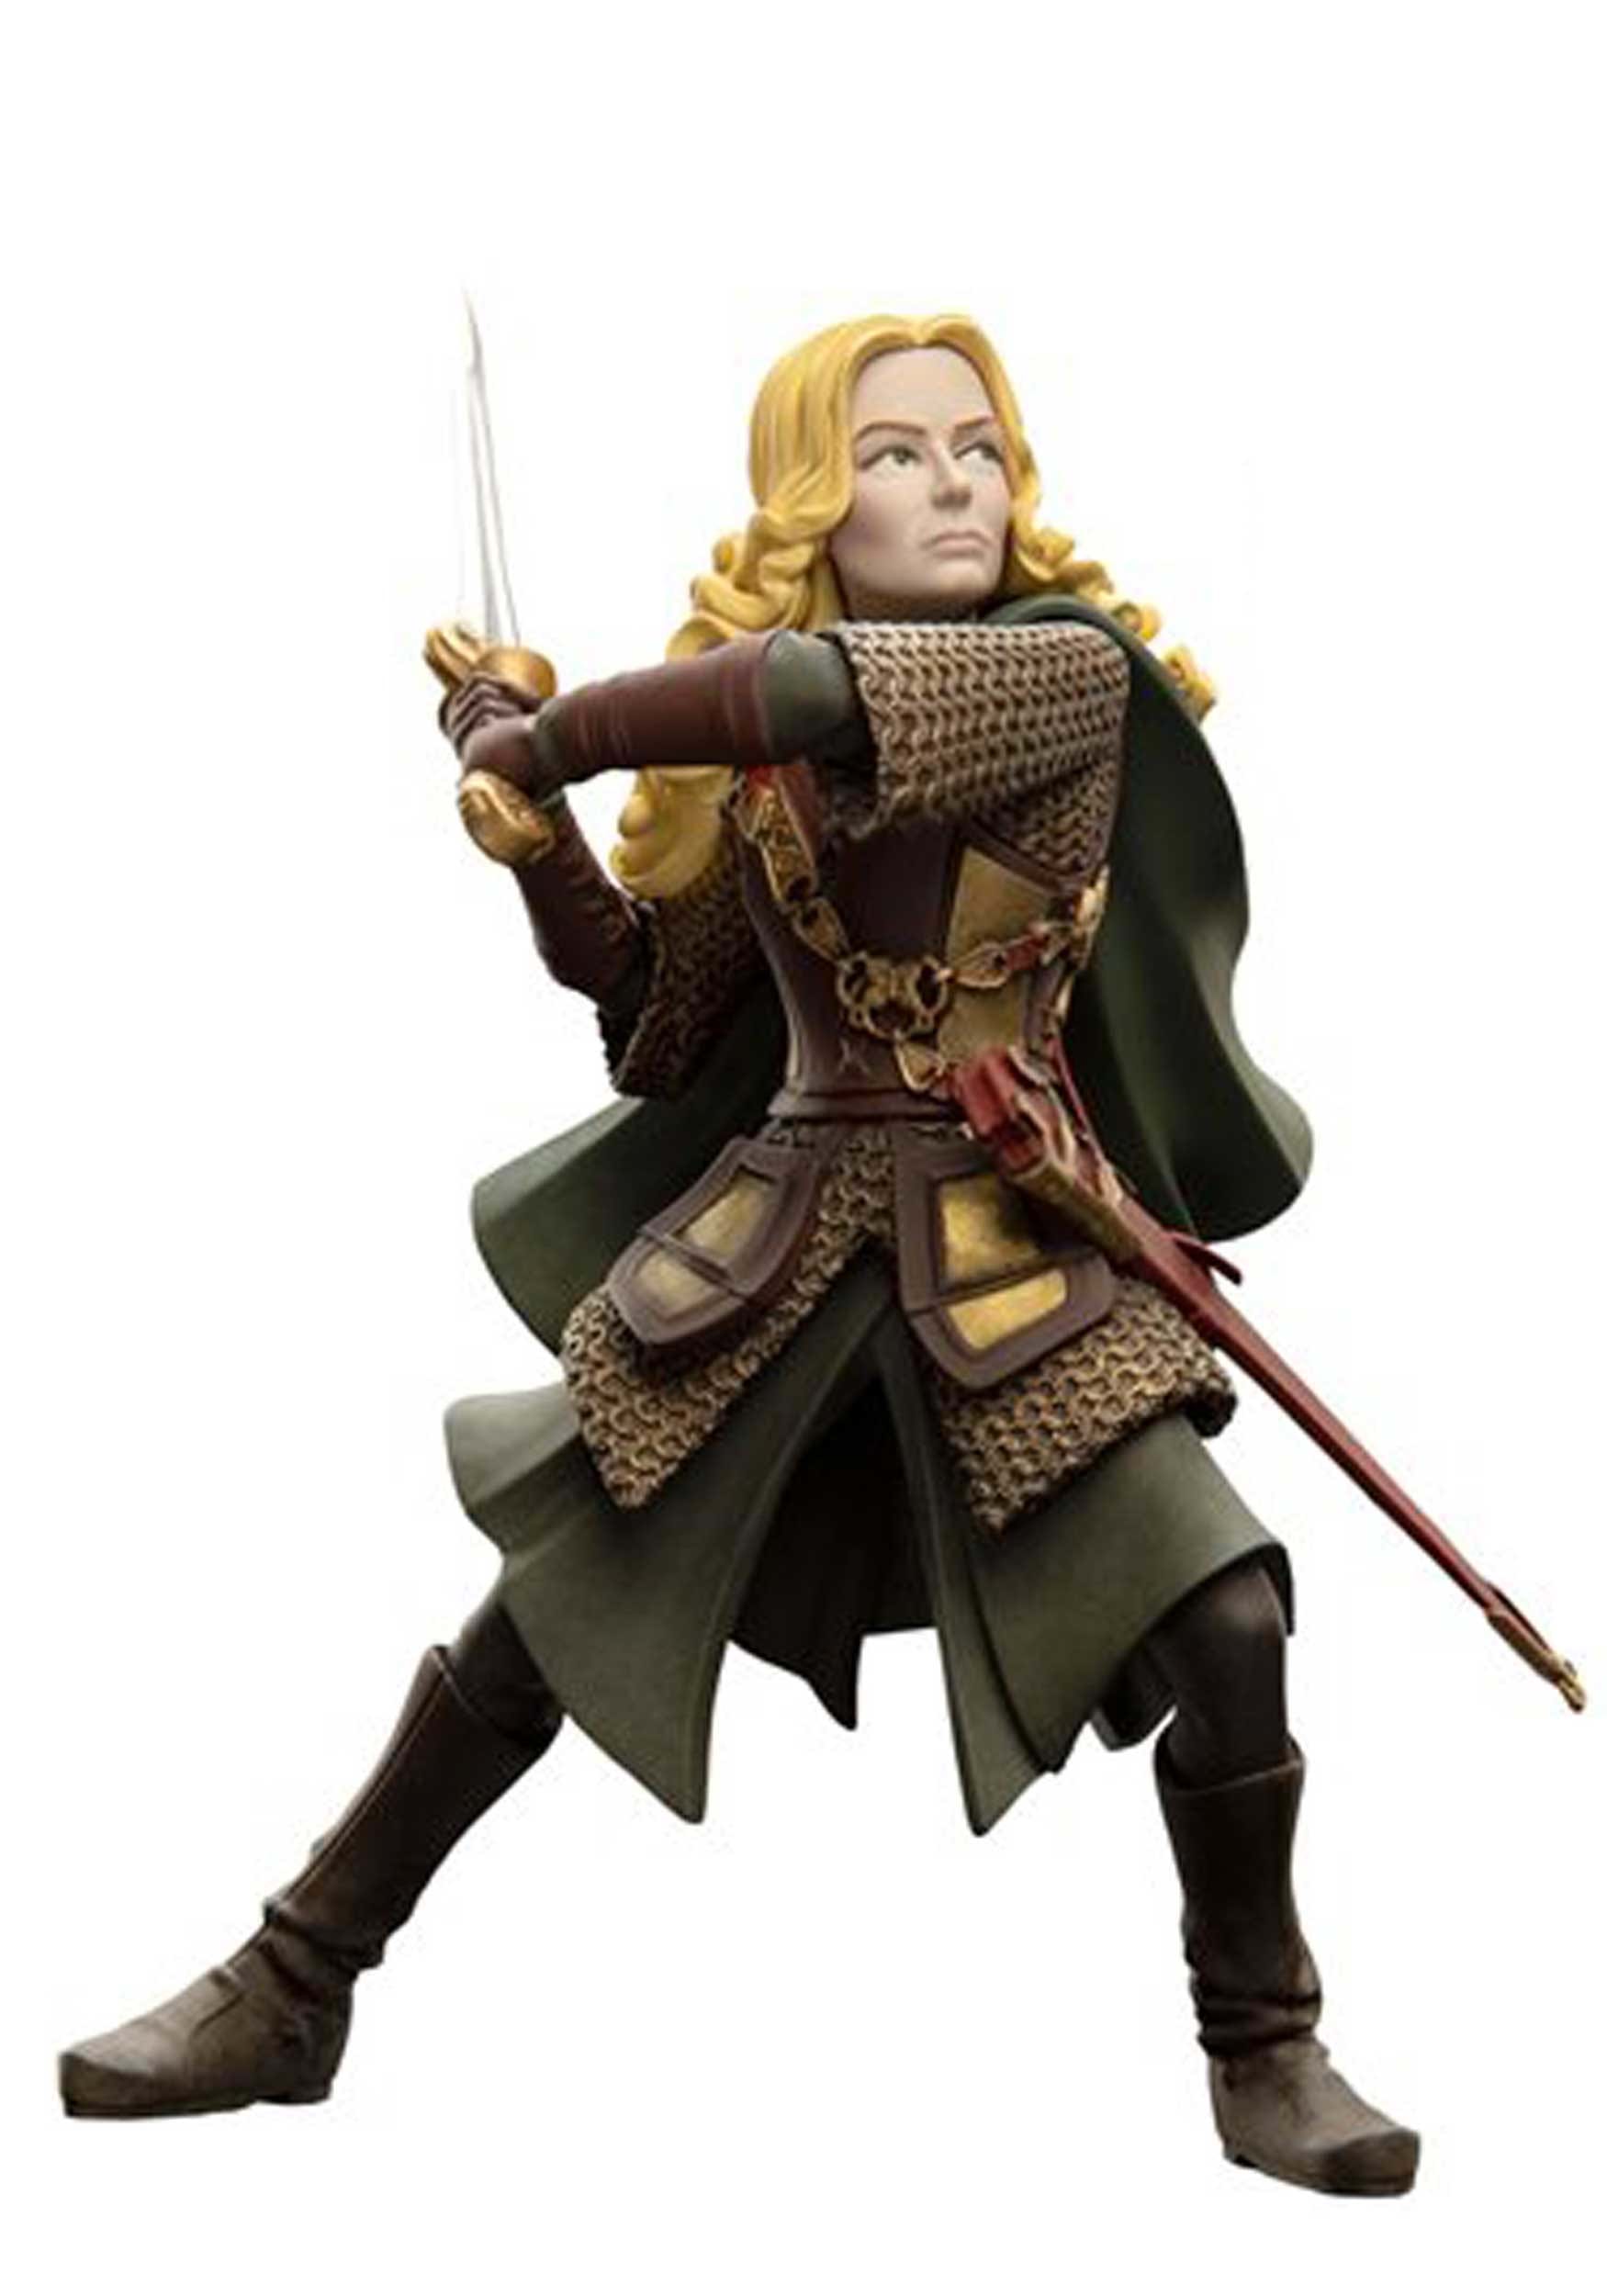 Eowyn The Lord of the Rings Mini Epics Vinyl Figure